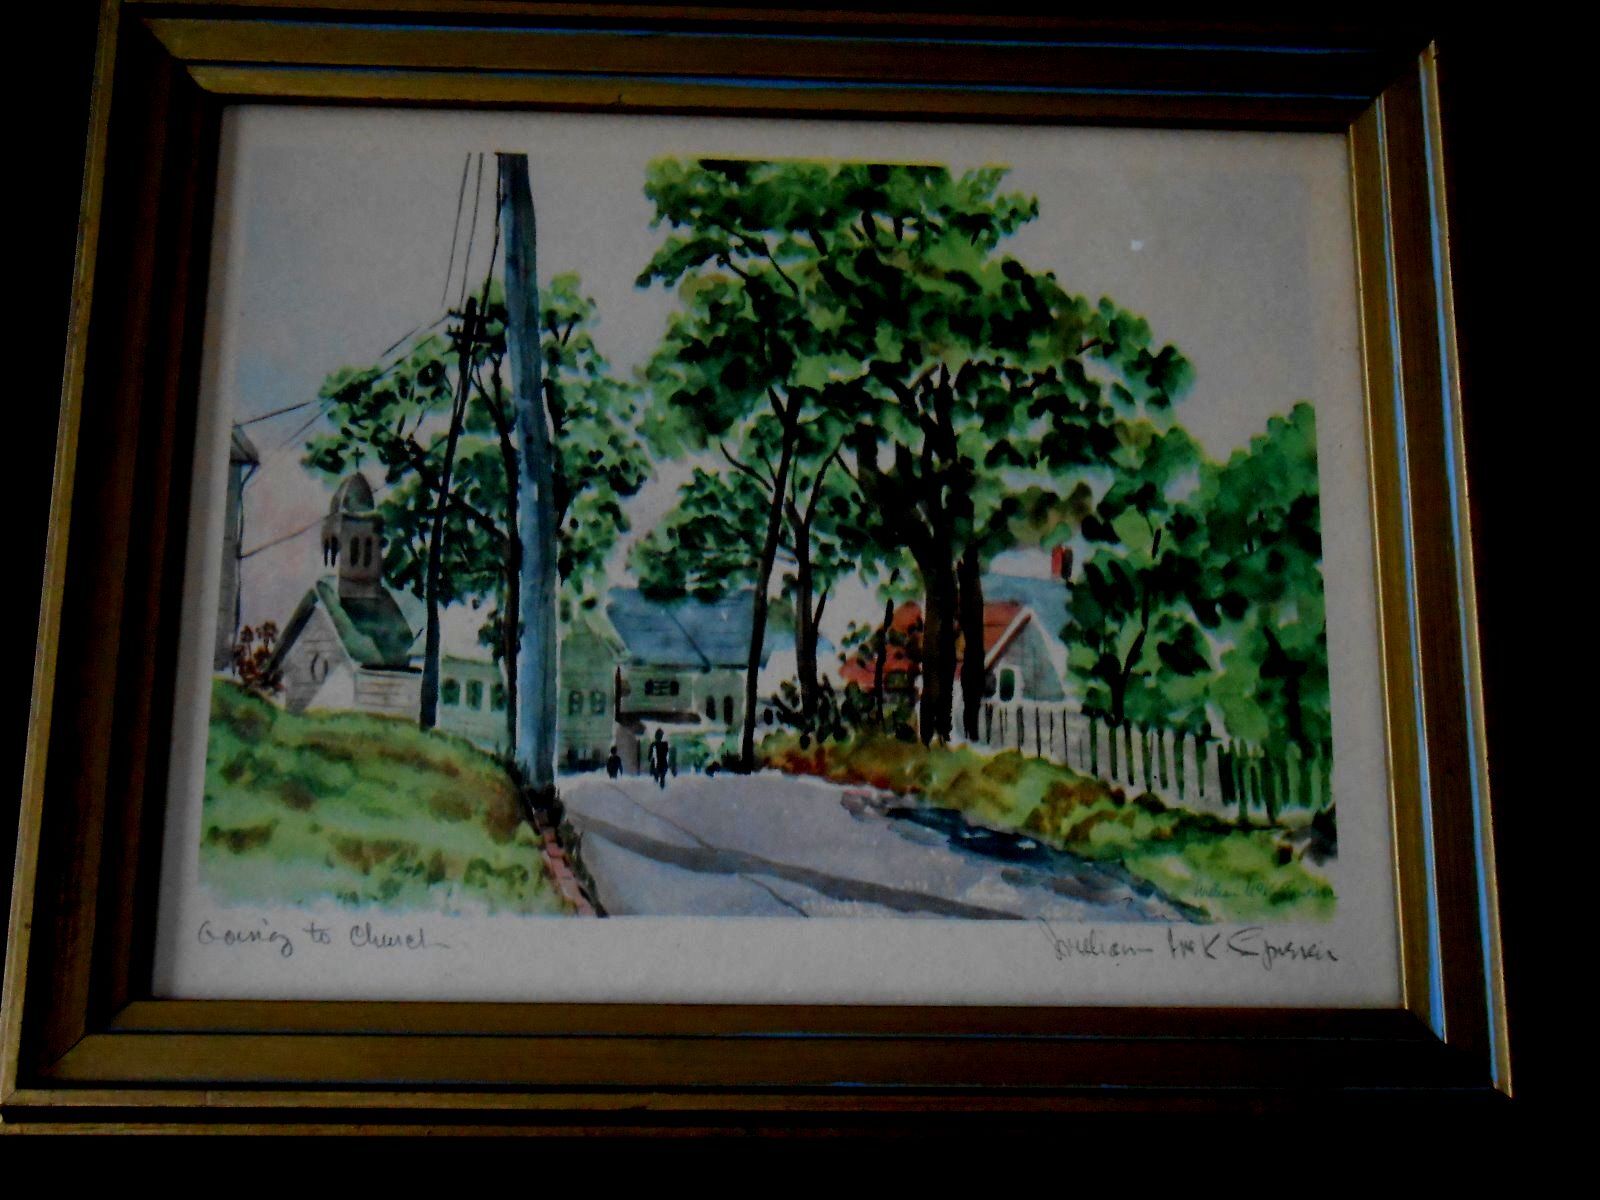 William Mck Spierer-Signed -Watercolor print-GOING TO CHURCH-vintage-framed